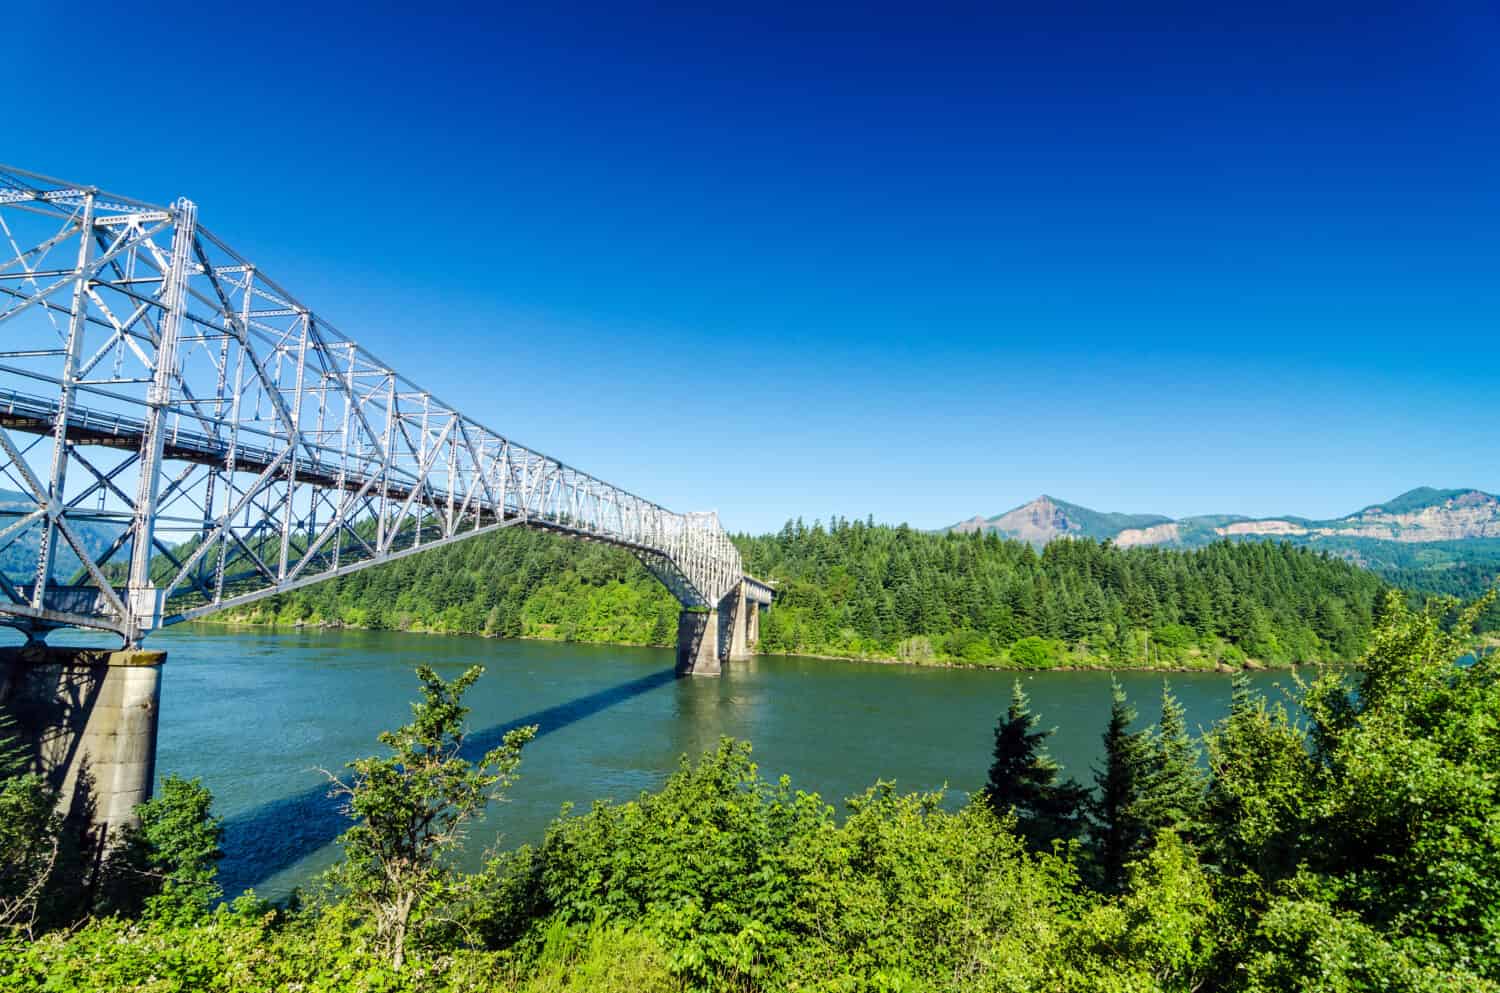 View of the Bridge of the Gods as seen from Oregon crossing the Columbia River into Washington